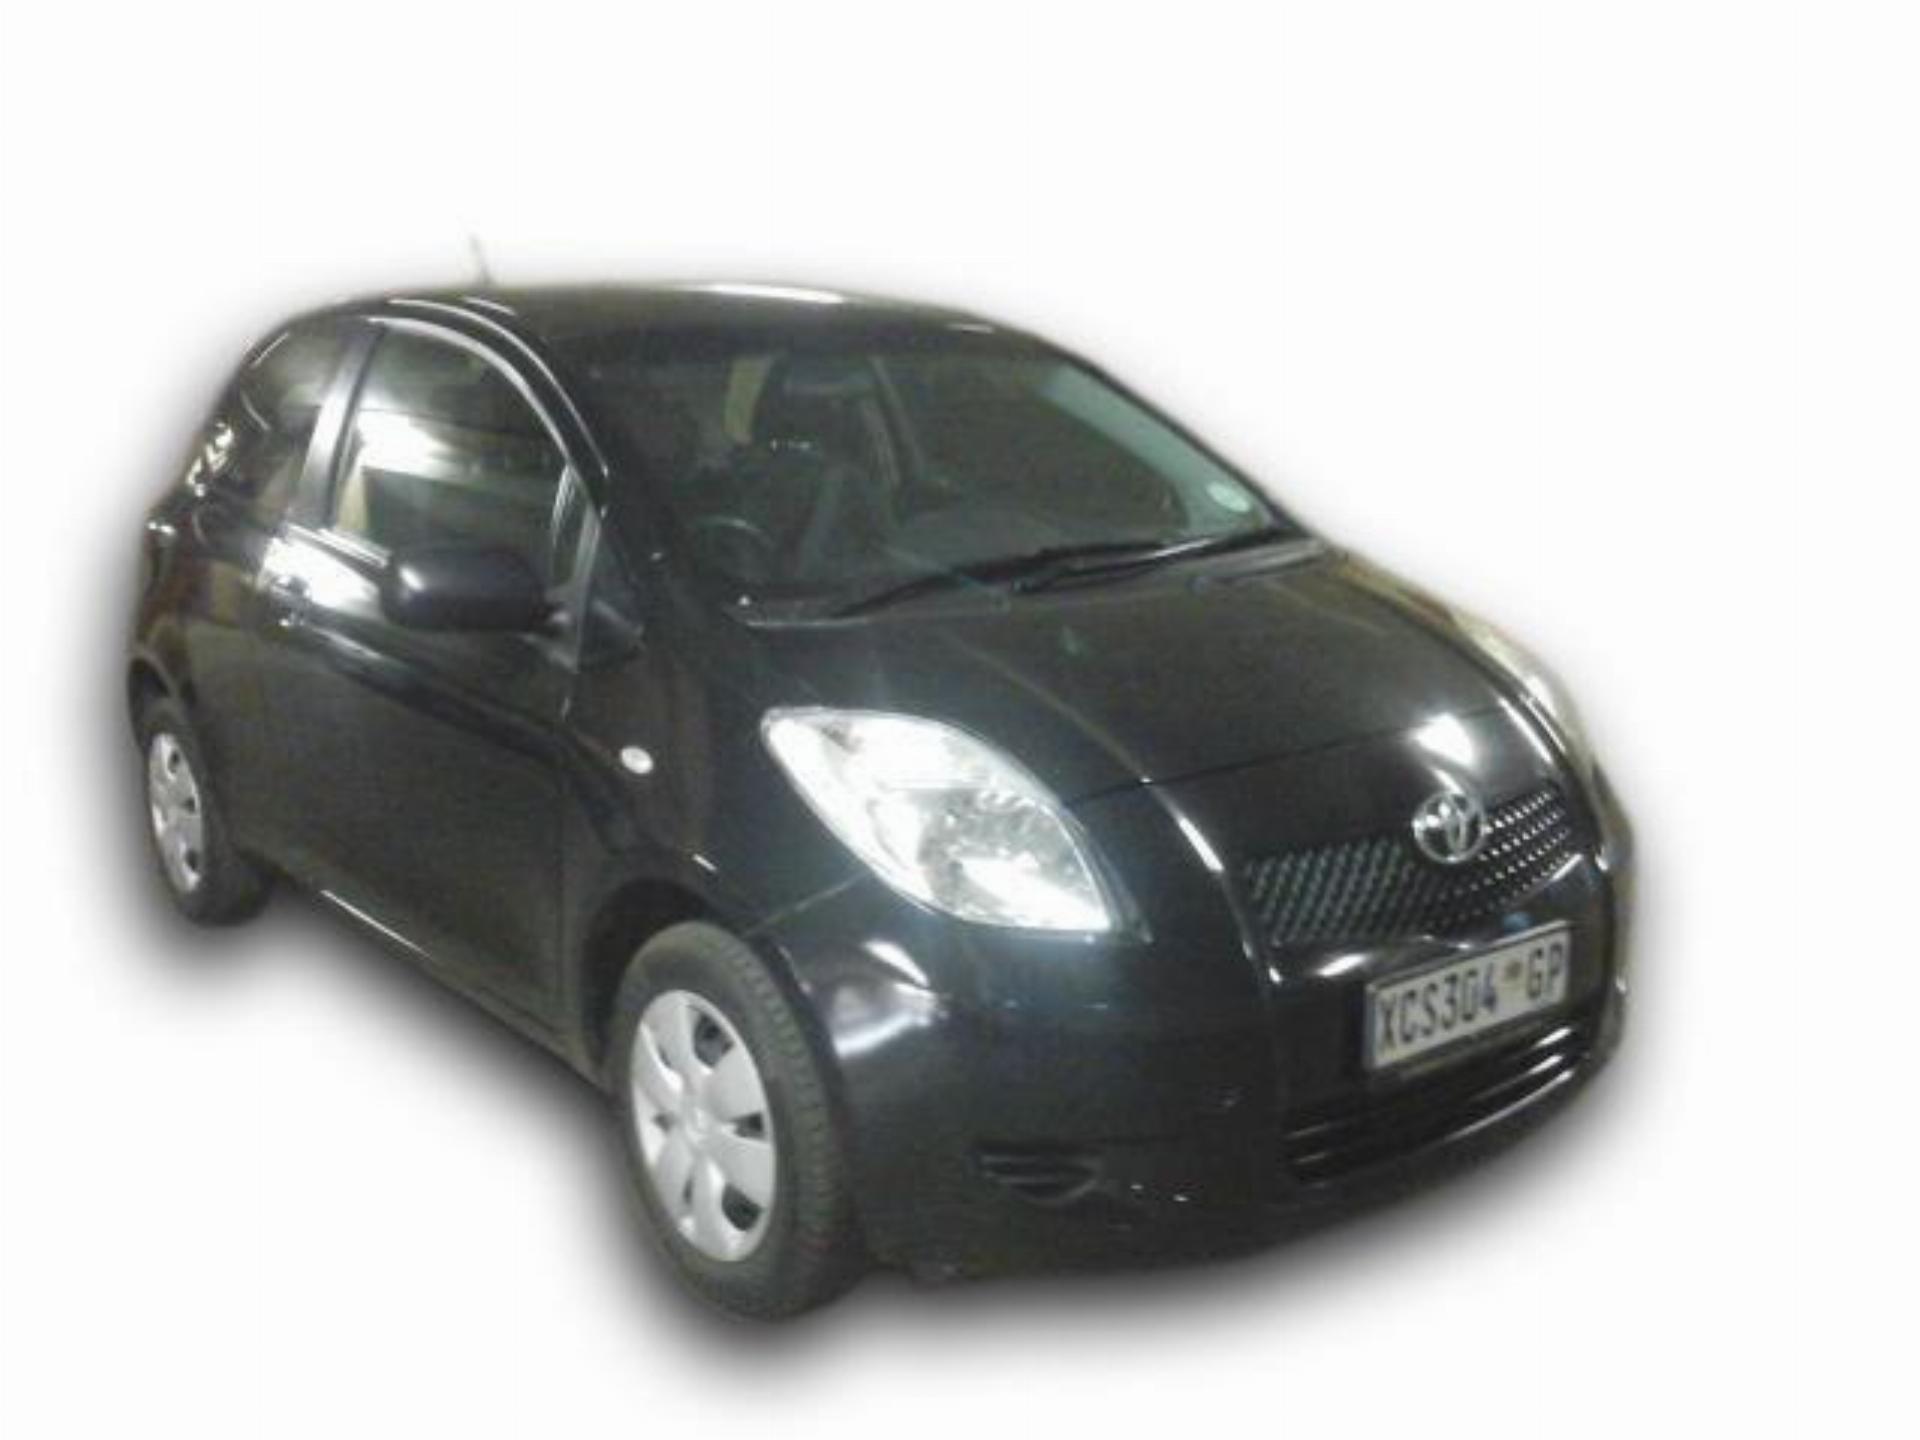 Toyota Yaris Low Mileage And Good Runner